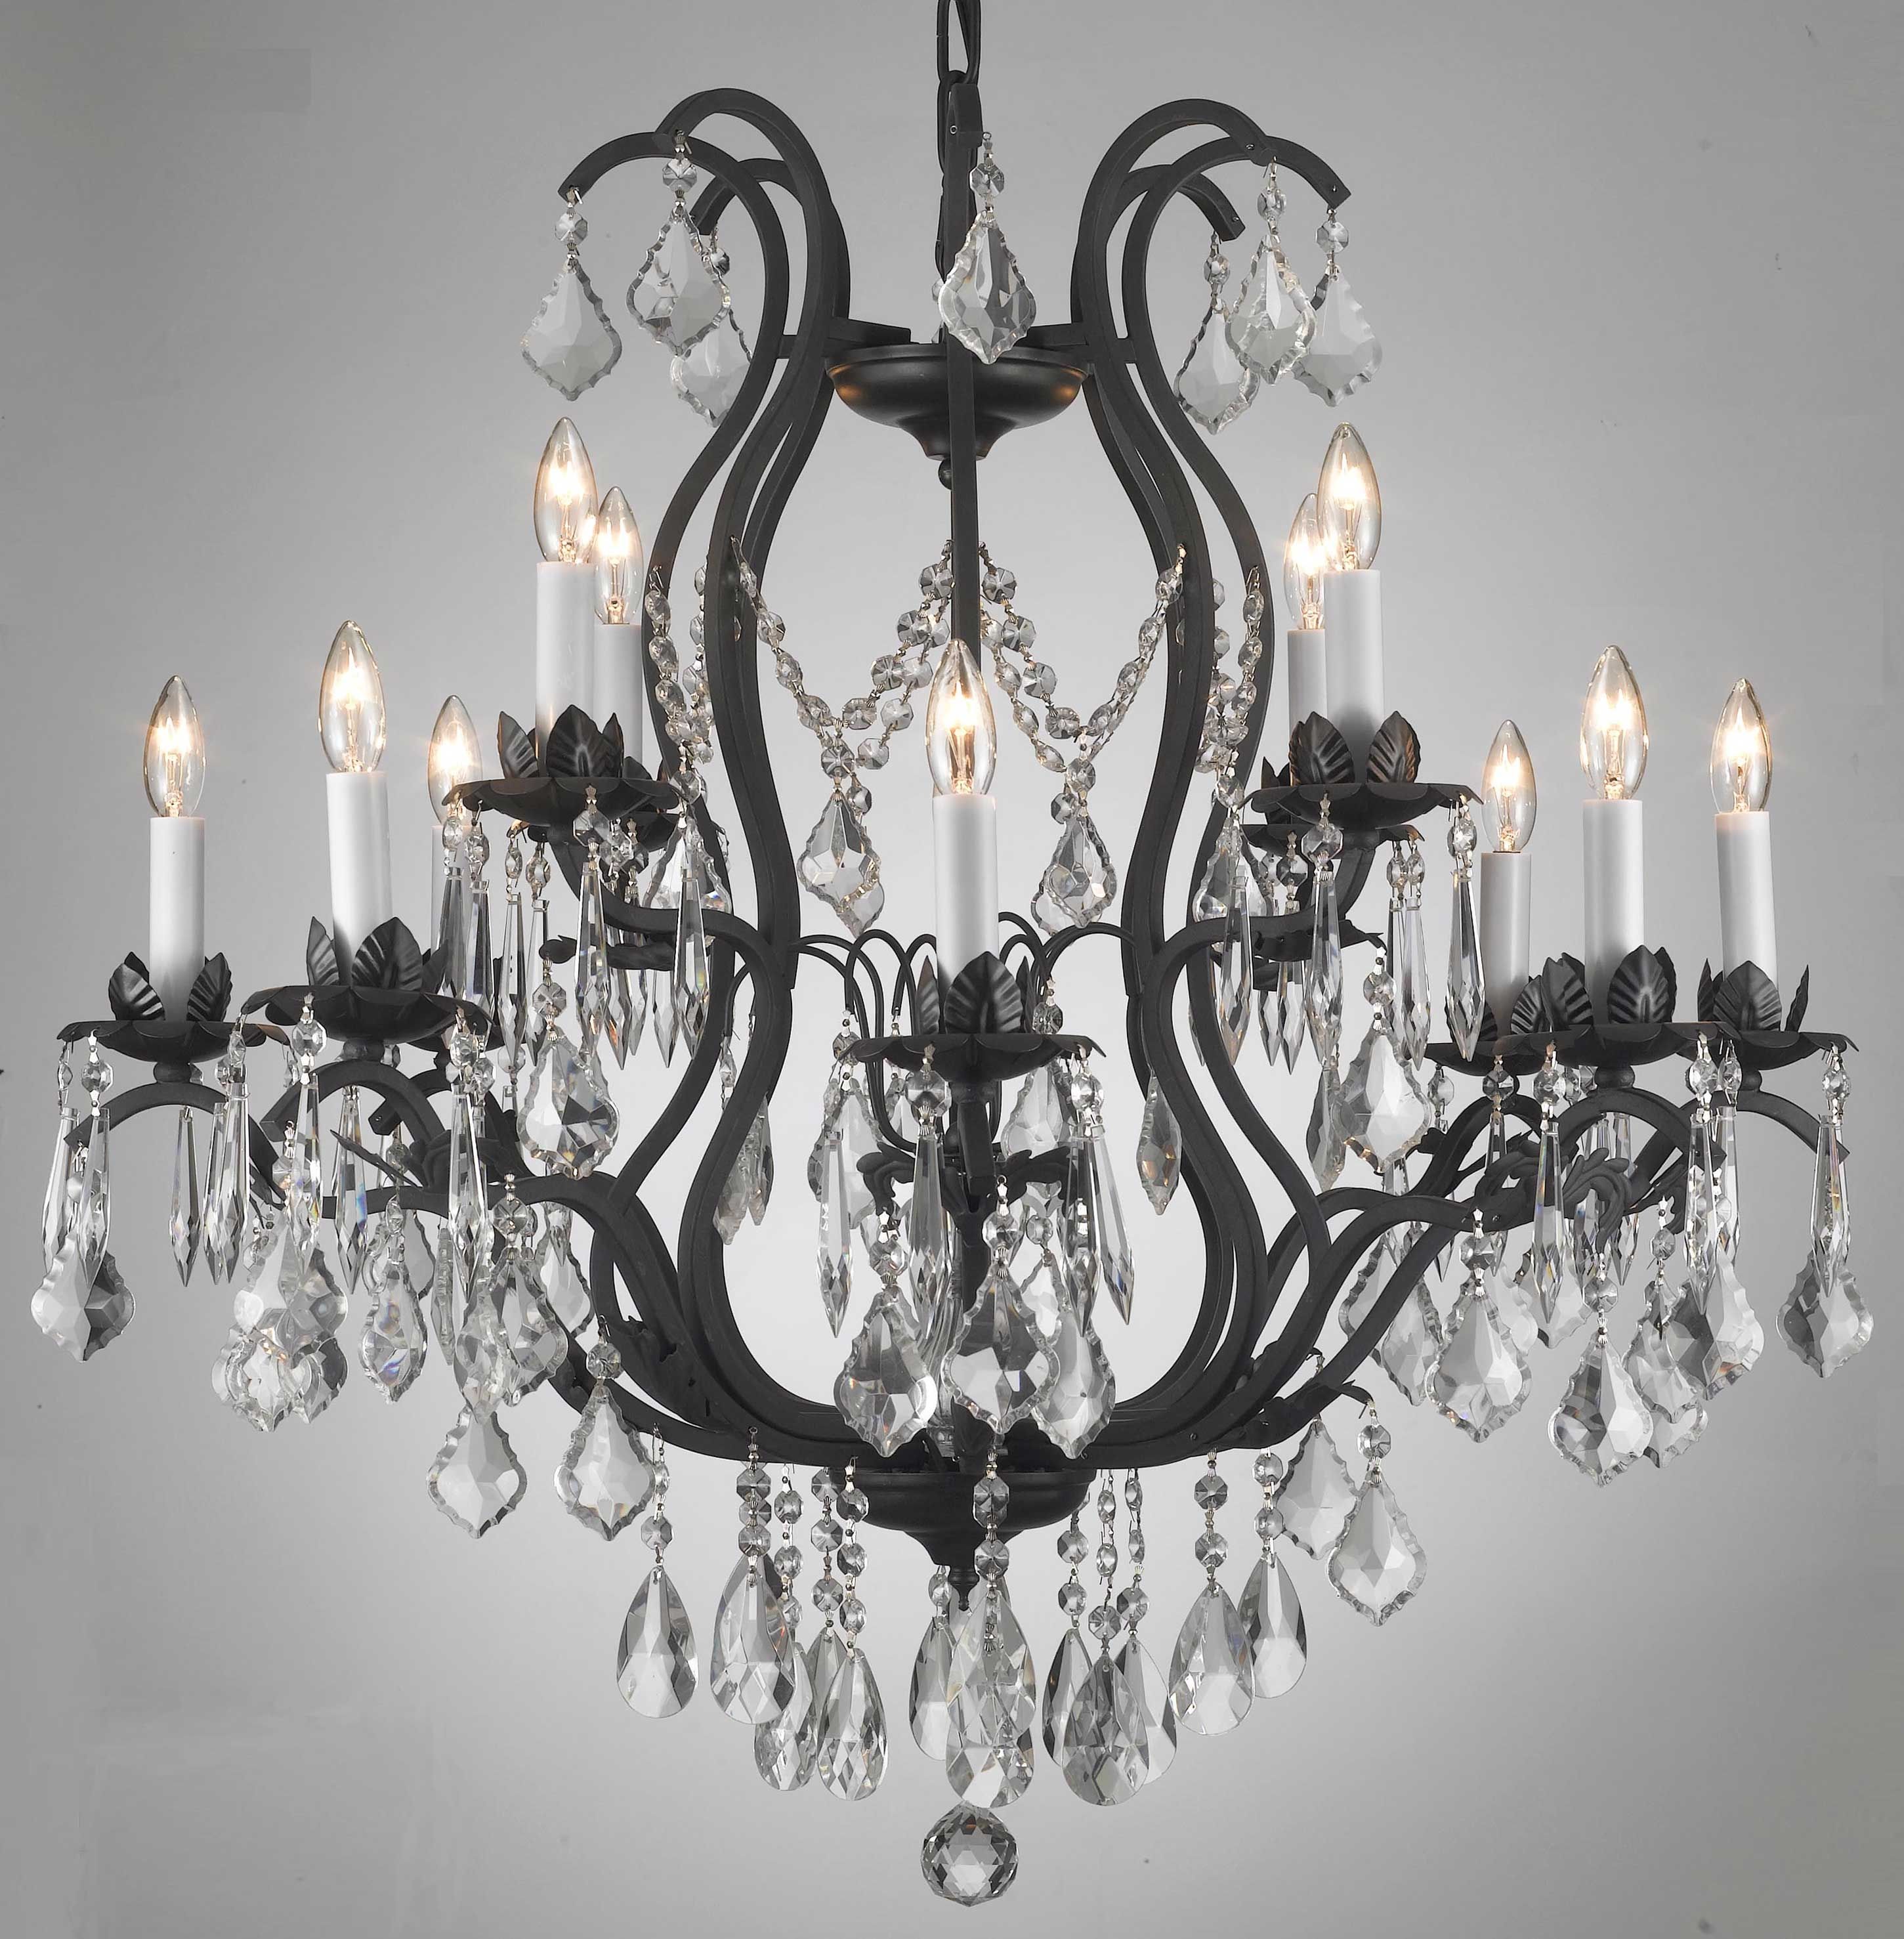 Chandelier Chandeliers Crystal Chandelier Crystal Chandeliers Regarding Cast Iron Chandelier (View 5 of 12)